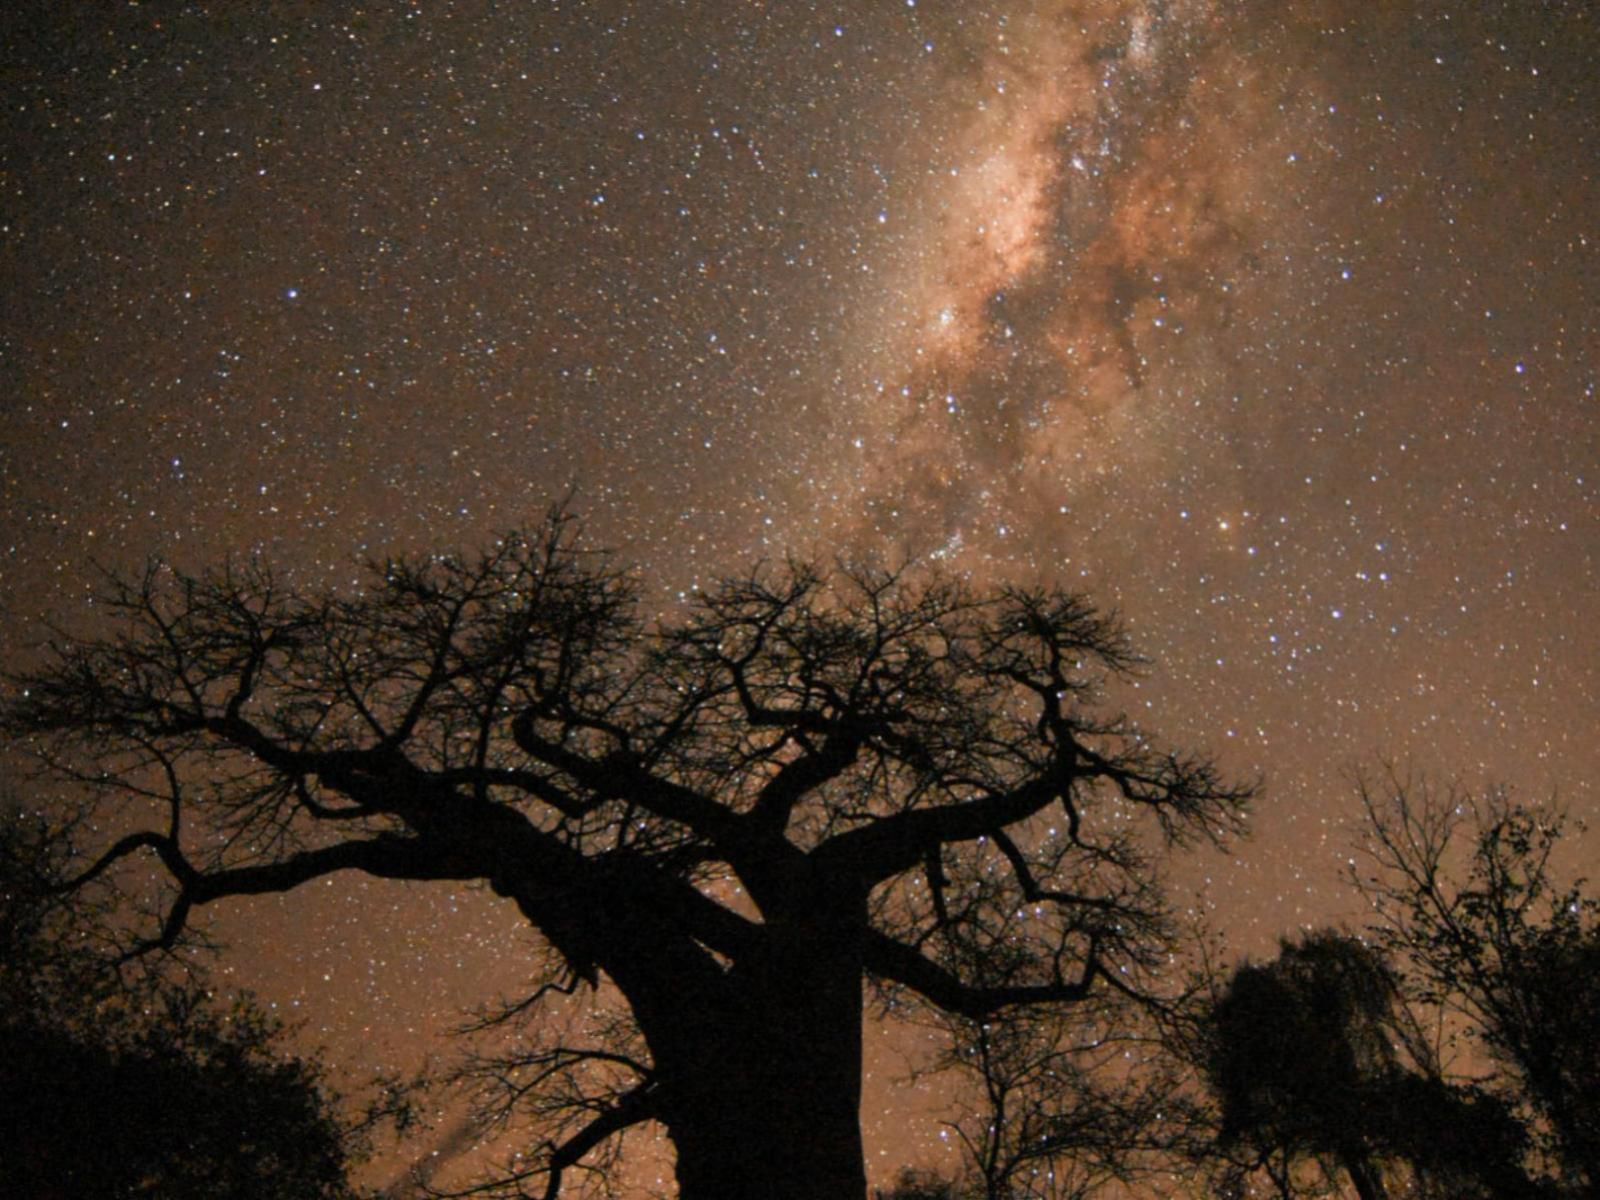 Nthakeni Bush And River Camp Makuya Nature Reserve Limpopo Province South Africa Astronomy, Nature, Night Sky